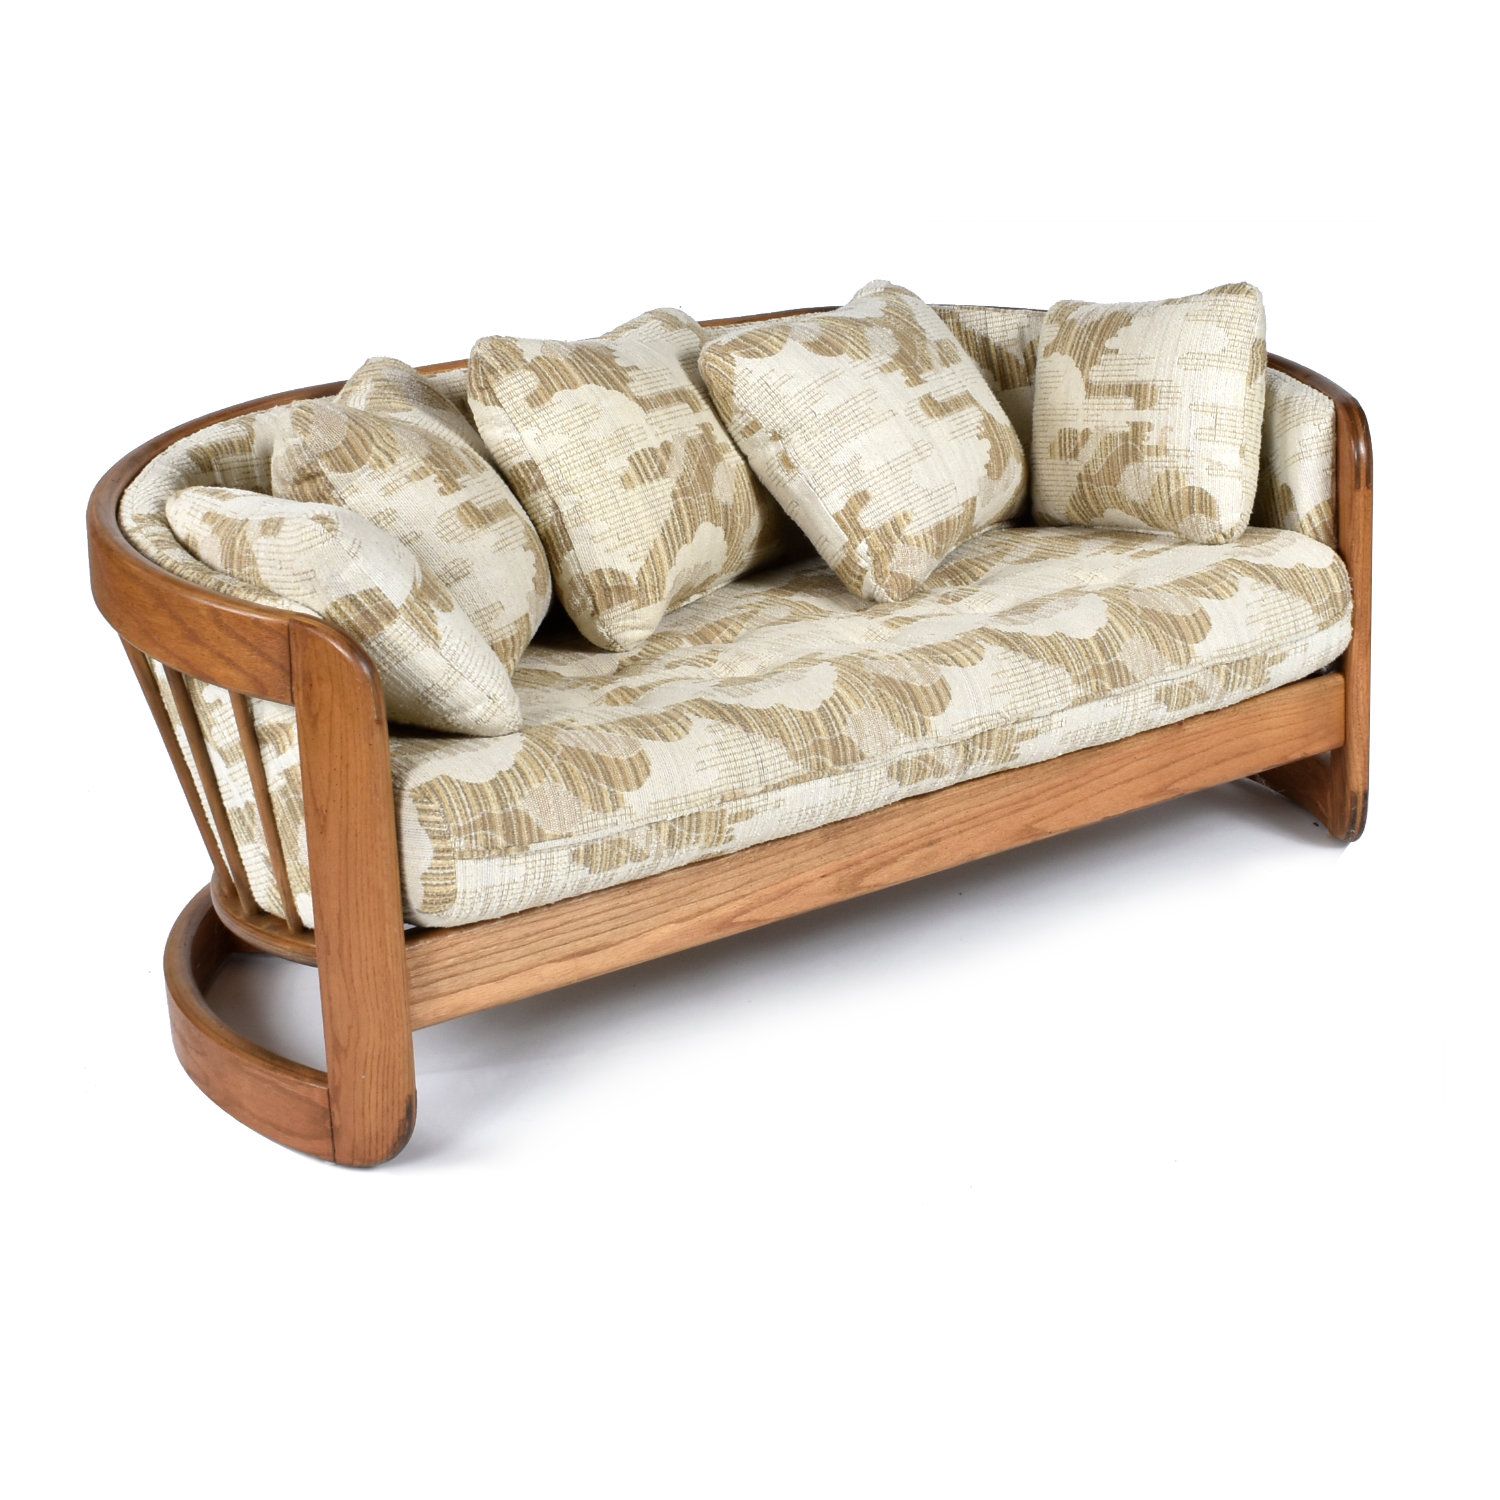 Beige Spindle Back Curved Solid Oak Wood Crescent Shaped Loveseat Inside Couches Love Seats With Wood Frame (View 6 of 15)